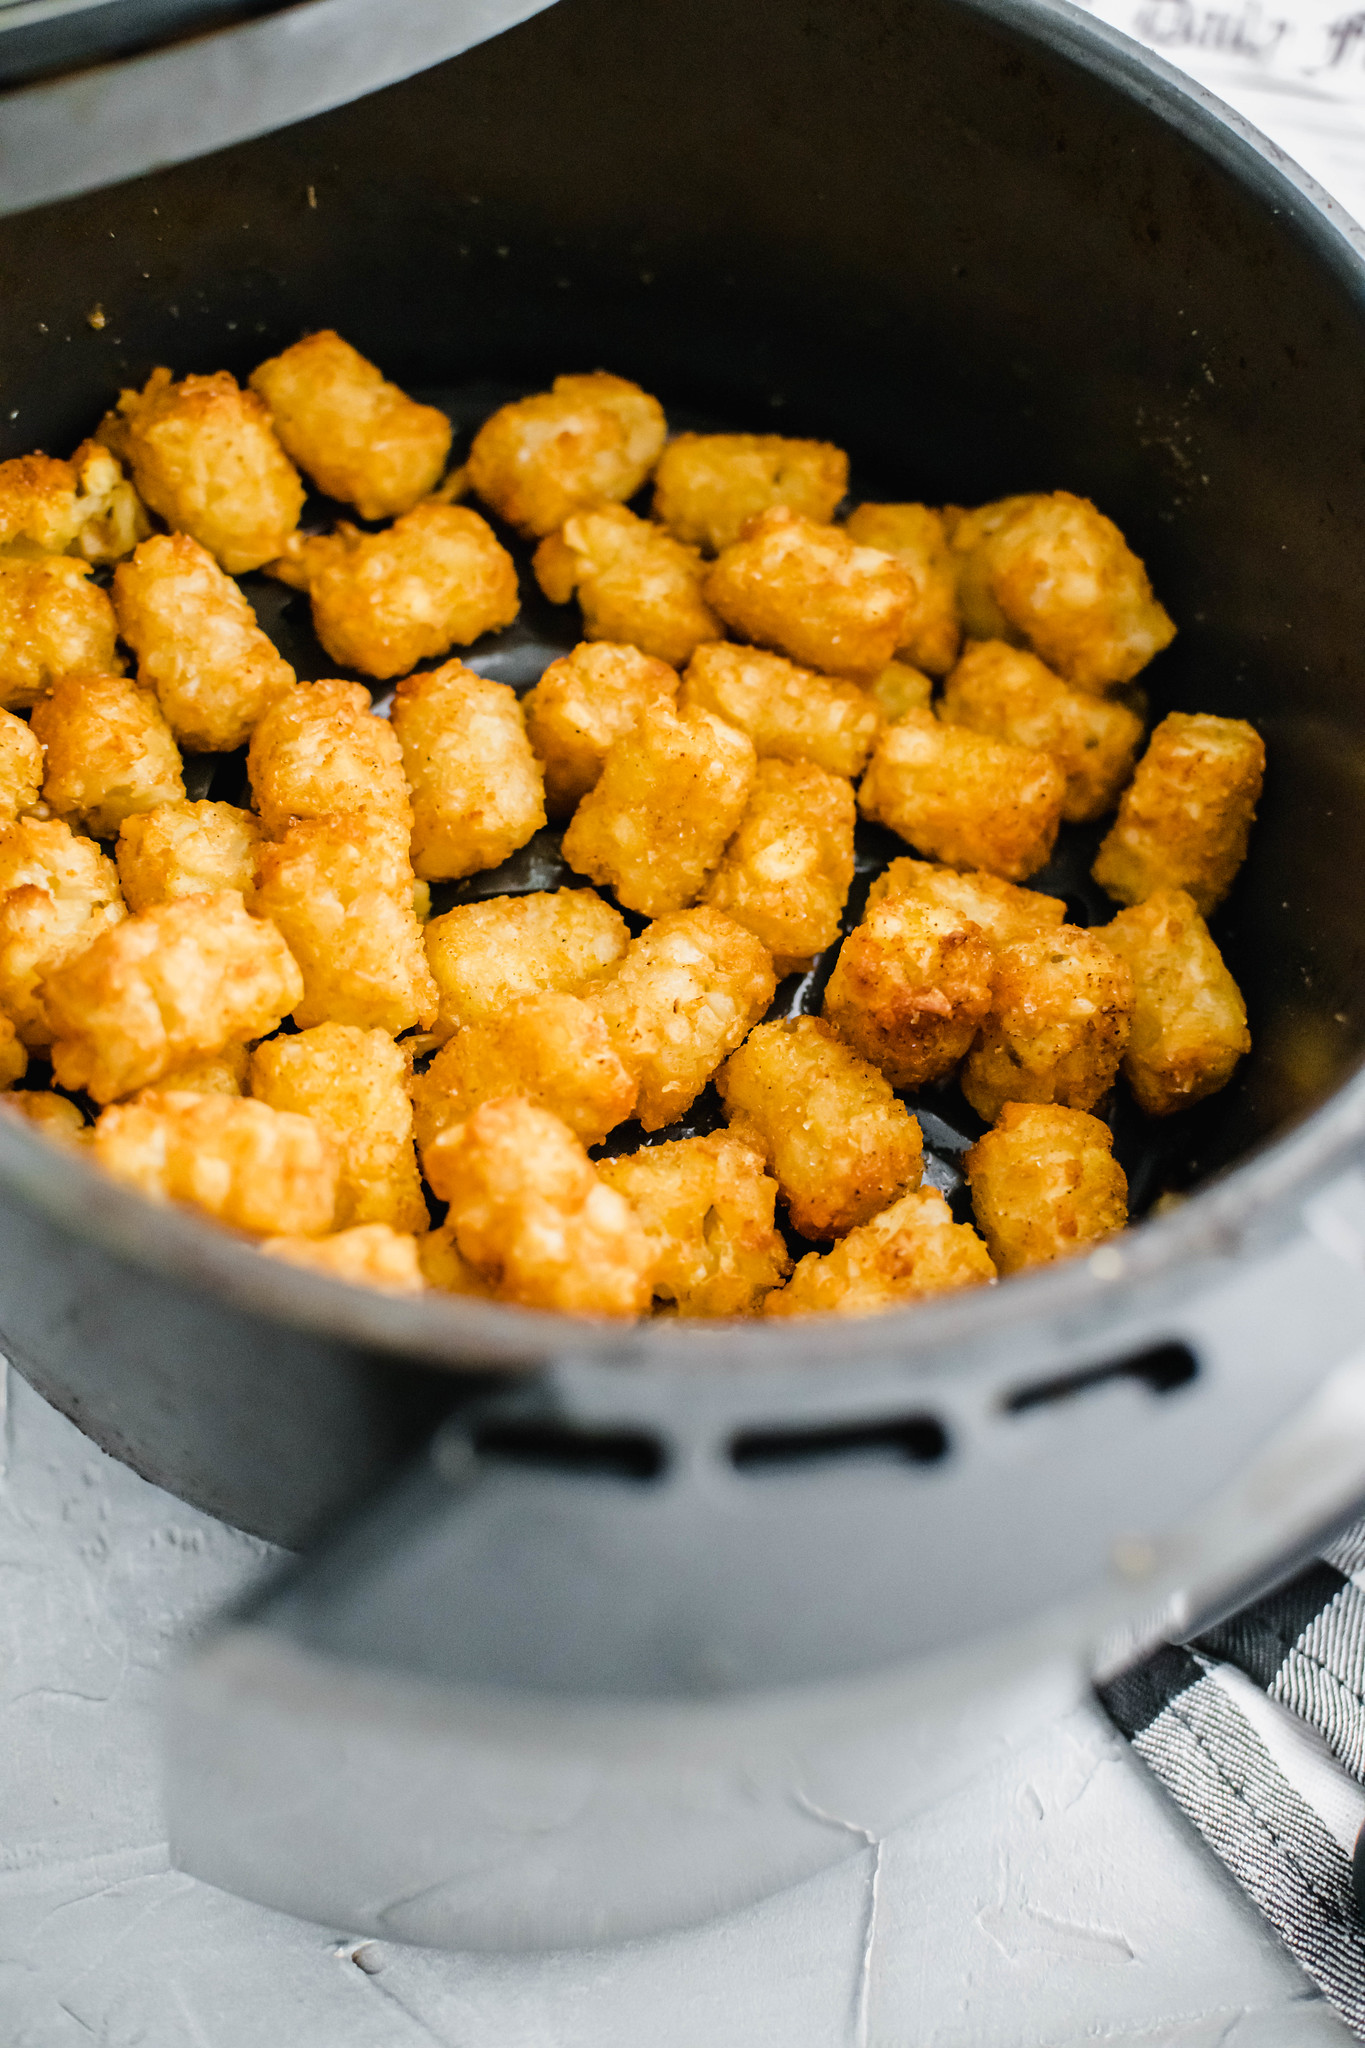 Tater tots in the air fryer basket.